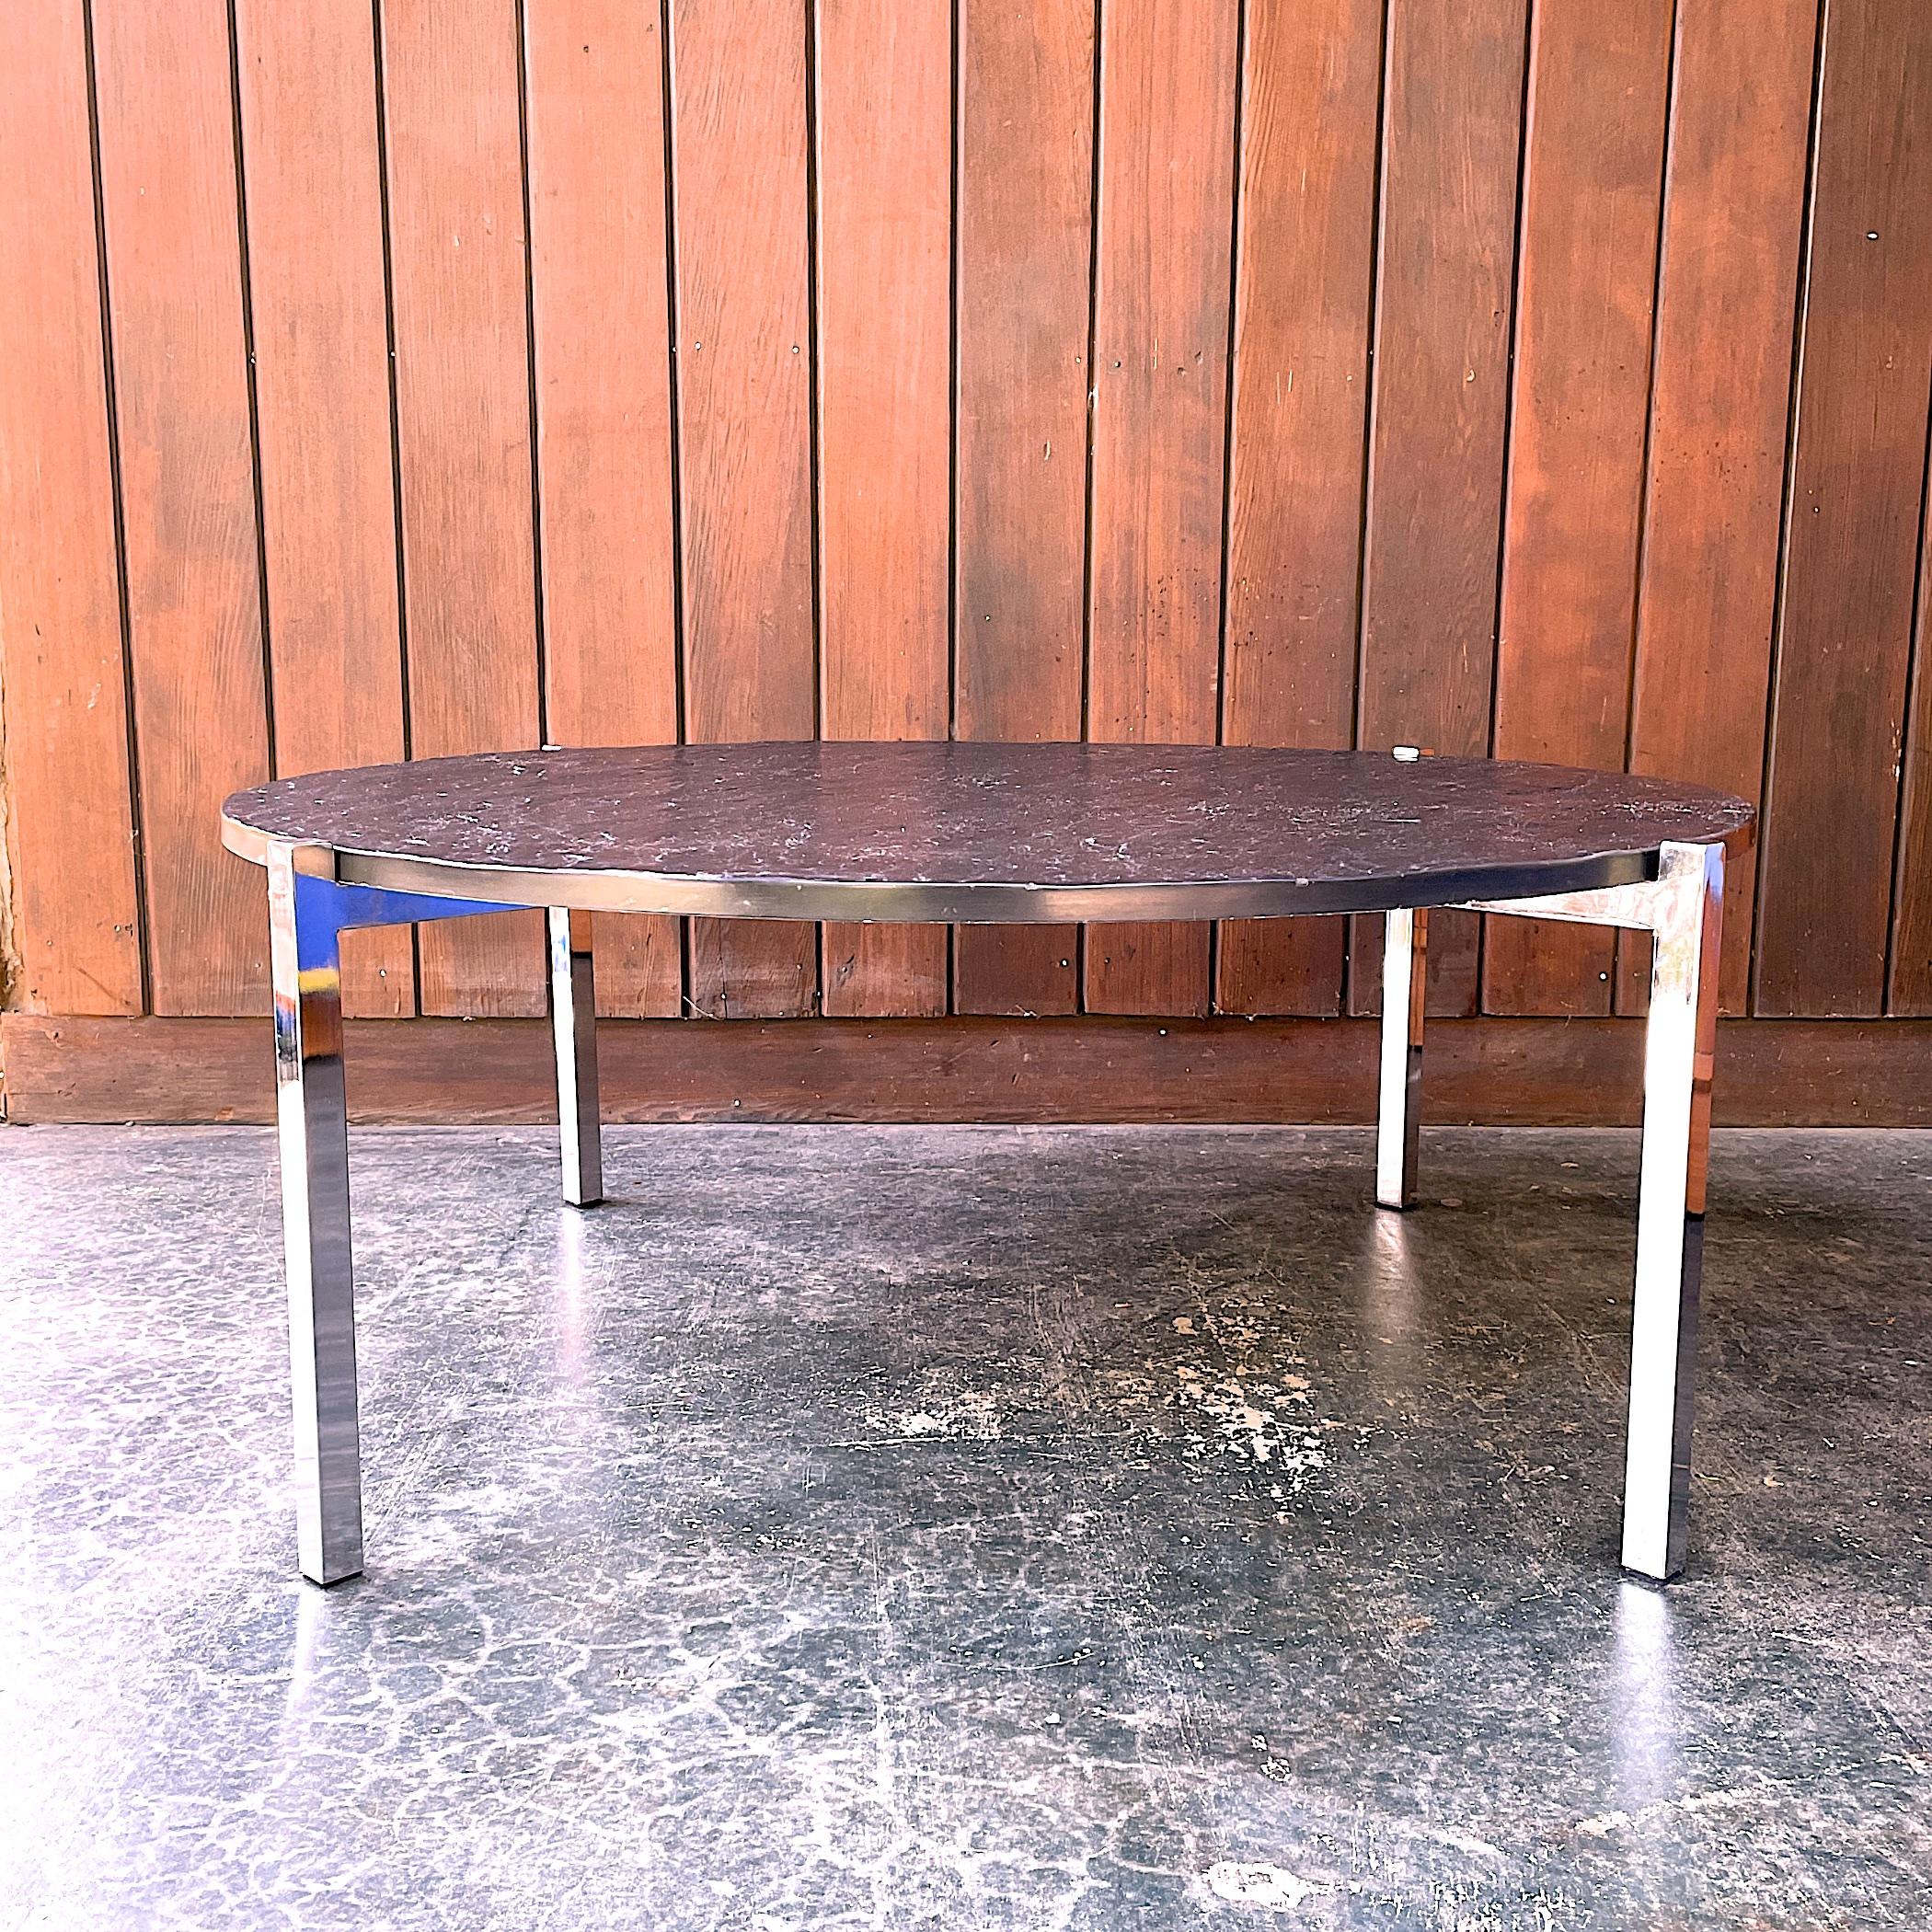 Procured from a 70s time capsule estate, designer for this table is unknown. Polished and chrome plated base, with cool blue plastic plugs to bottoms of each leg. Its a very well made piece with a very heavy top, about 70 lbs. Top showing some light